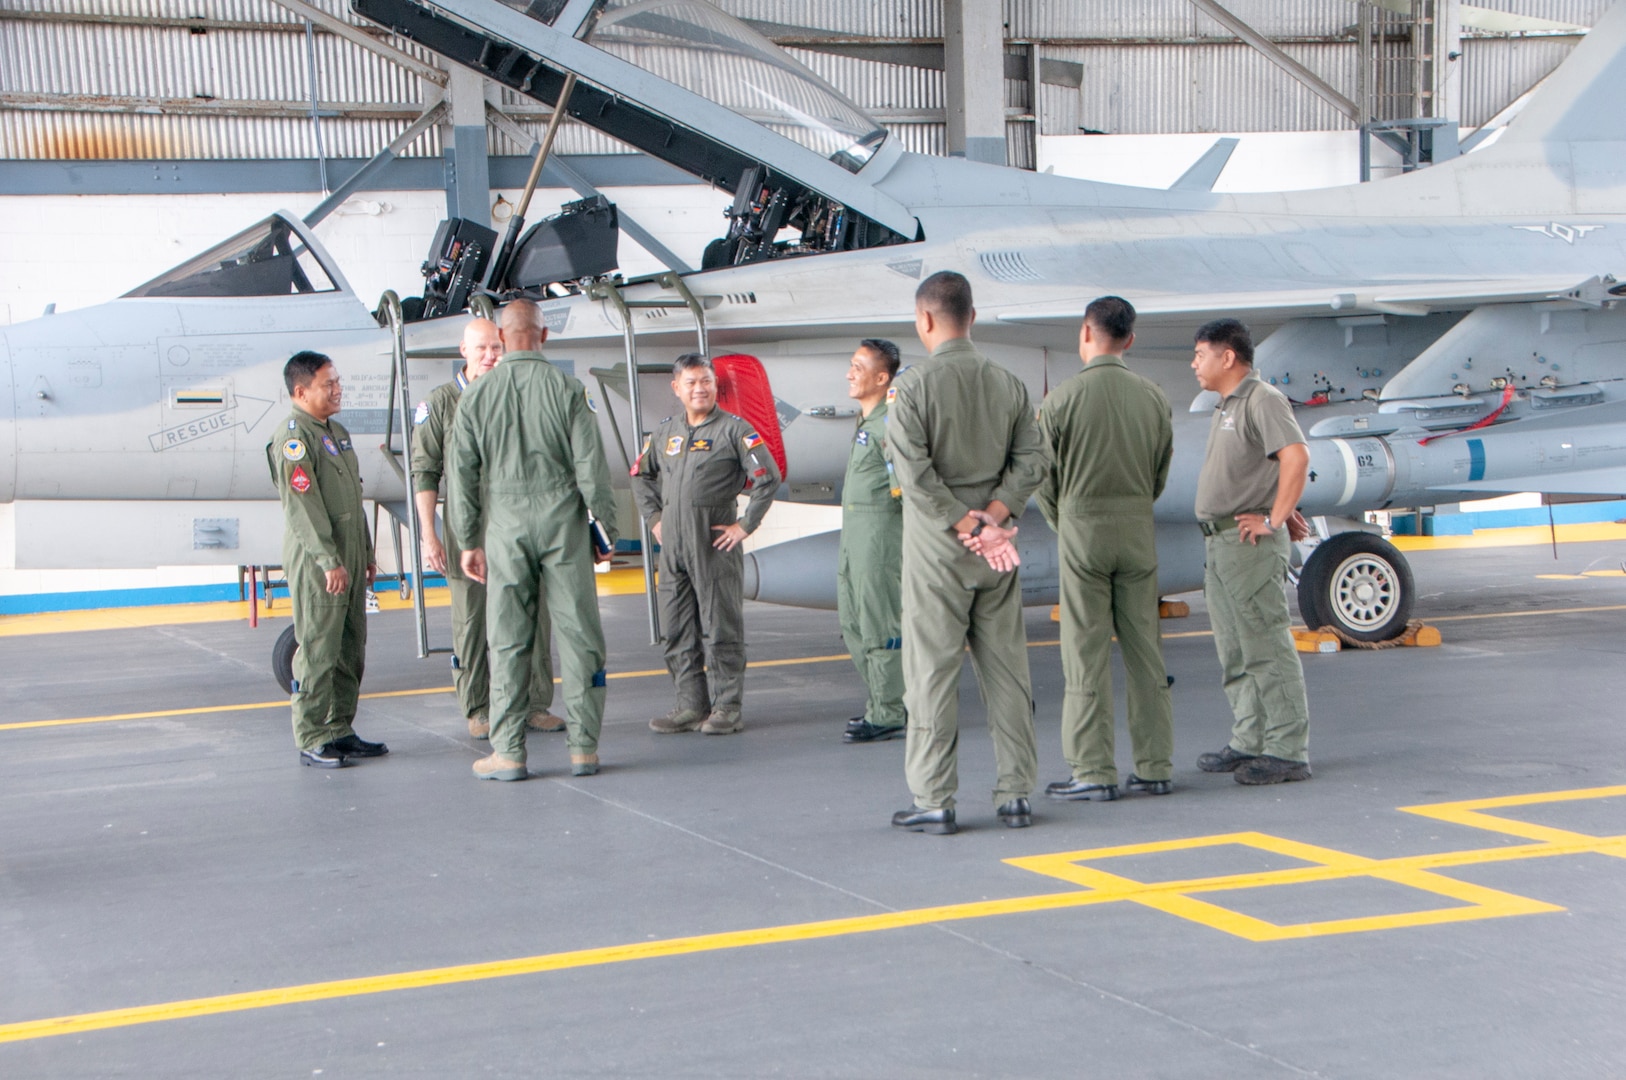 Philippine Air Force officials give a tour of the PAF’s FA-50 fighter aircraft and facilities Aug. 9, 2018, Clark Air Force Base, Philippines. The tour was part of a subject matter expert exchange between the Philippine Air Force and the Hawaii Air National Guard as part of a National Guard State Partnership Program engagement.